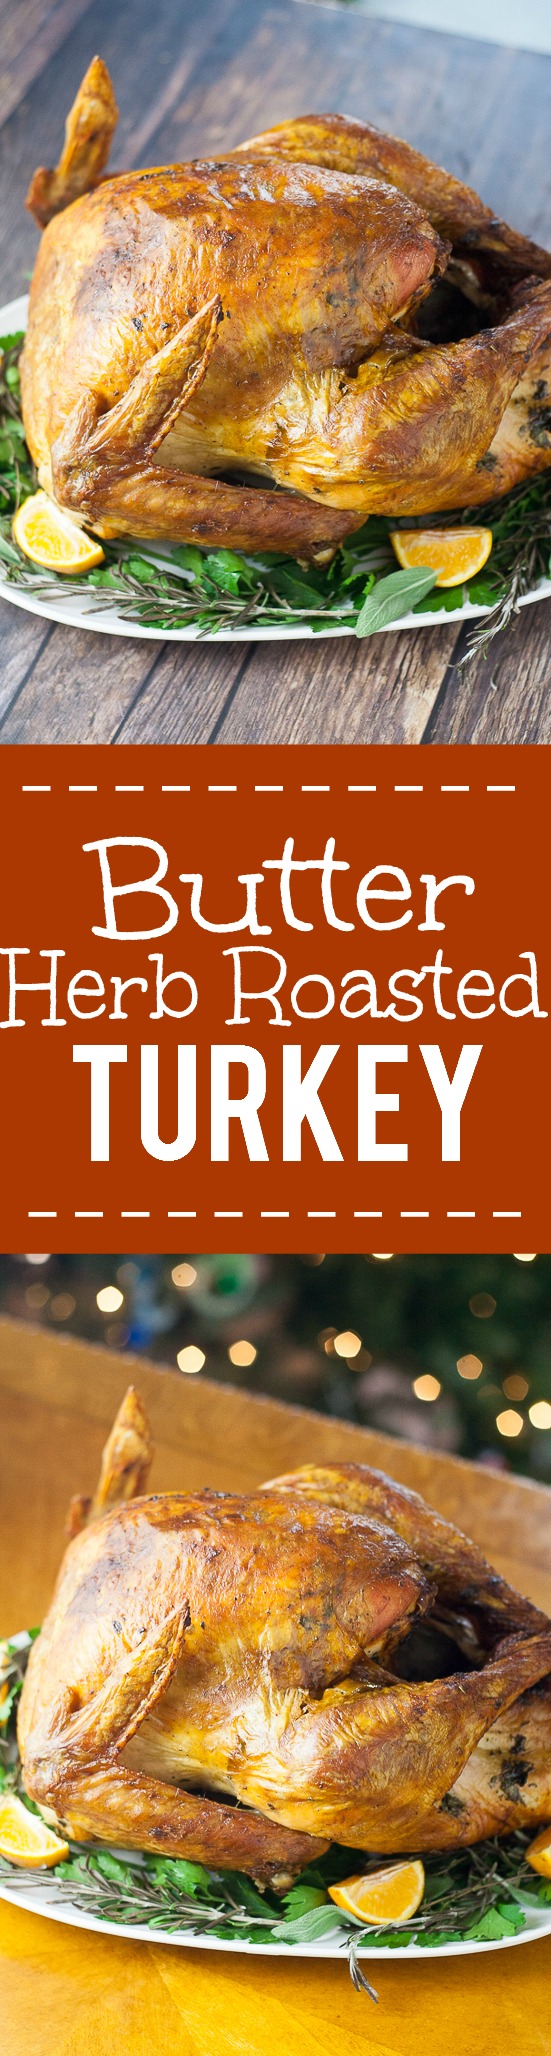 Butter Herb Roasted Turkey recipe that's perfect for a classic Thanksgiving turkey recipe - Golden, juicy, and delicious, this Butter Herb Roasted Turkey recipe won't disappoint with a hint of buttery herb flavor and a beautiful color. Will be the highlight of your holiday table!